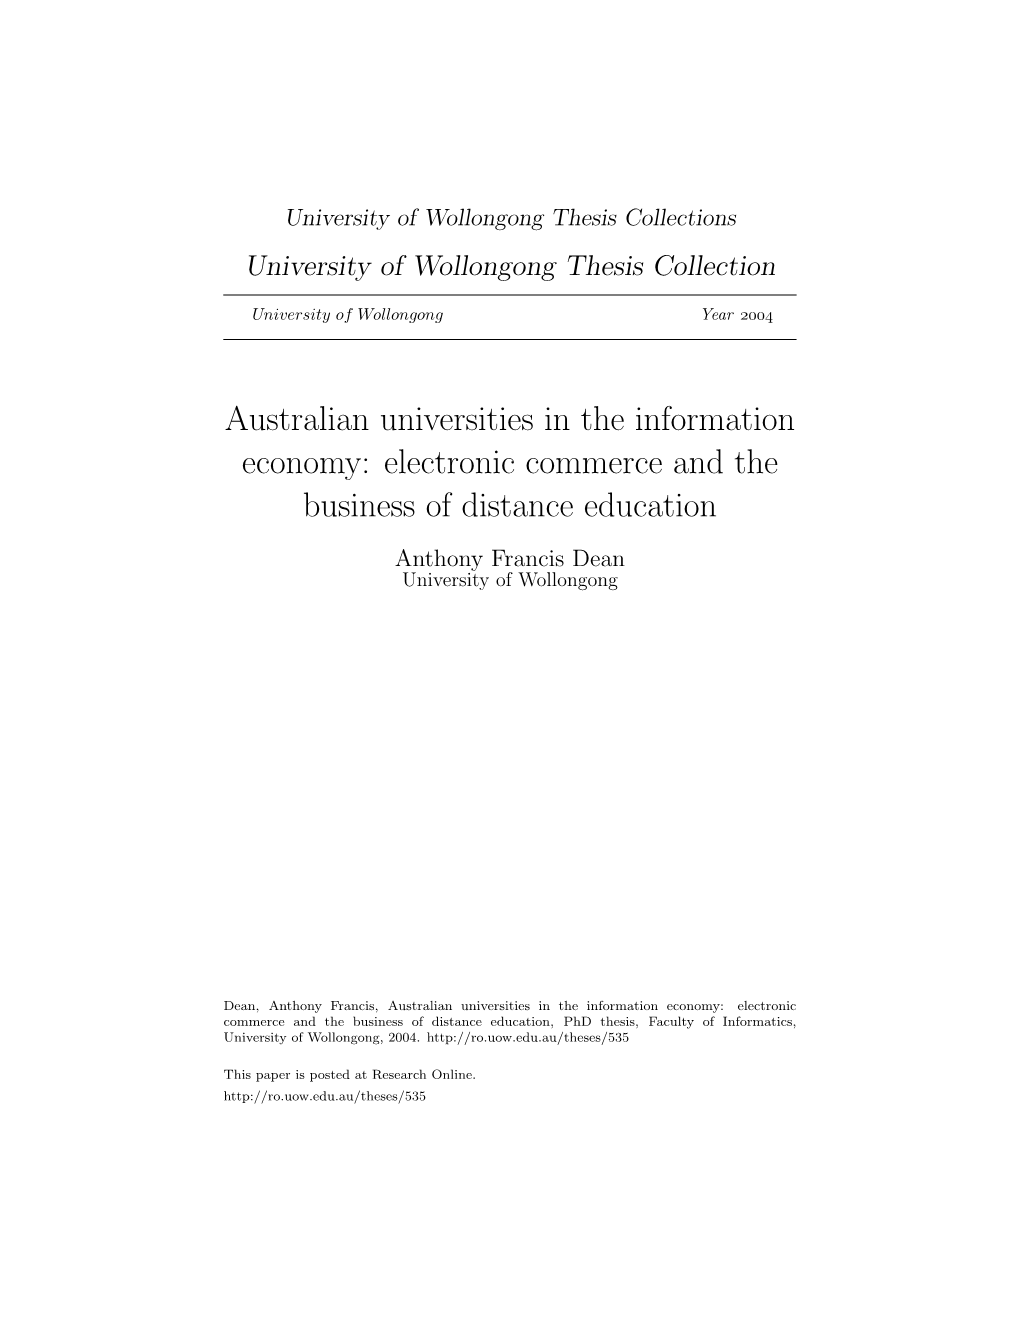 Australian Universities in the Information Economy: Electronic Commerce and the Business of Distance Education Anthony Francis Dean University of Wollongong